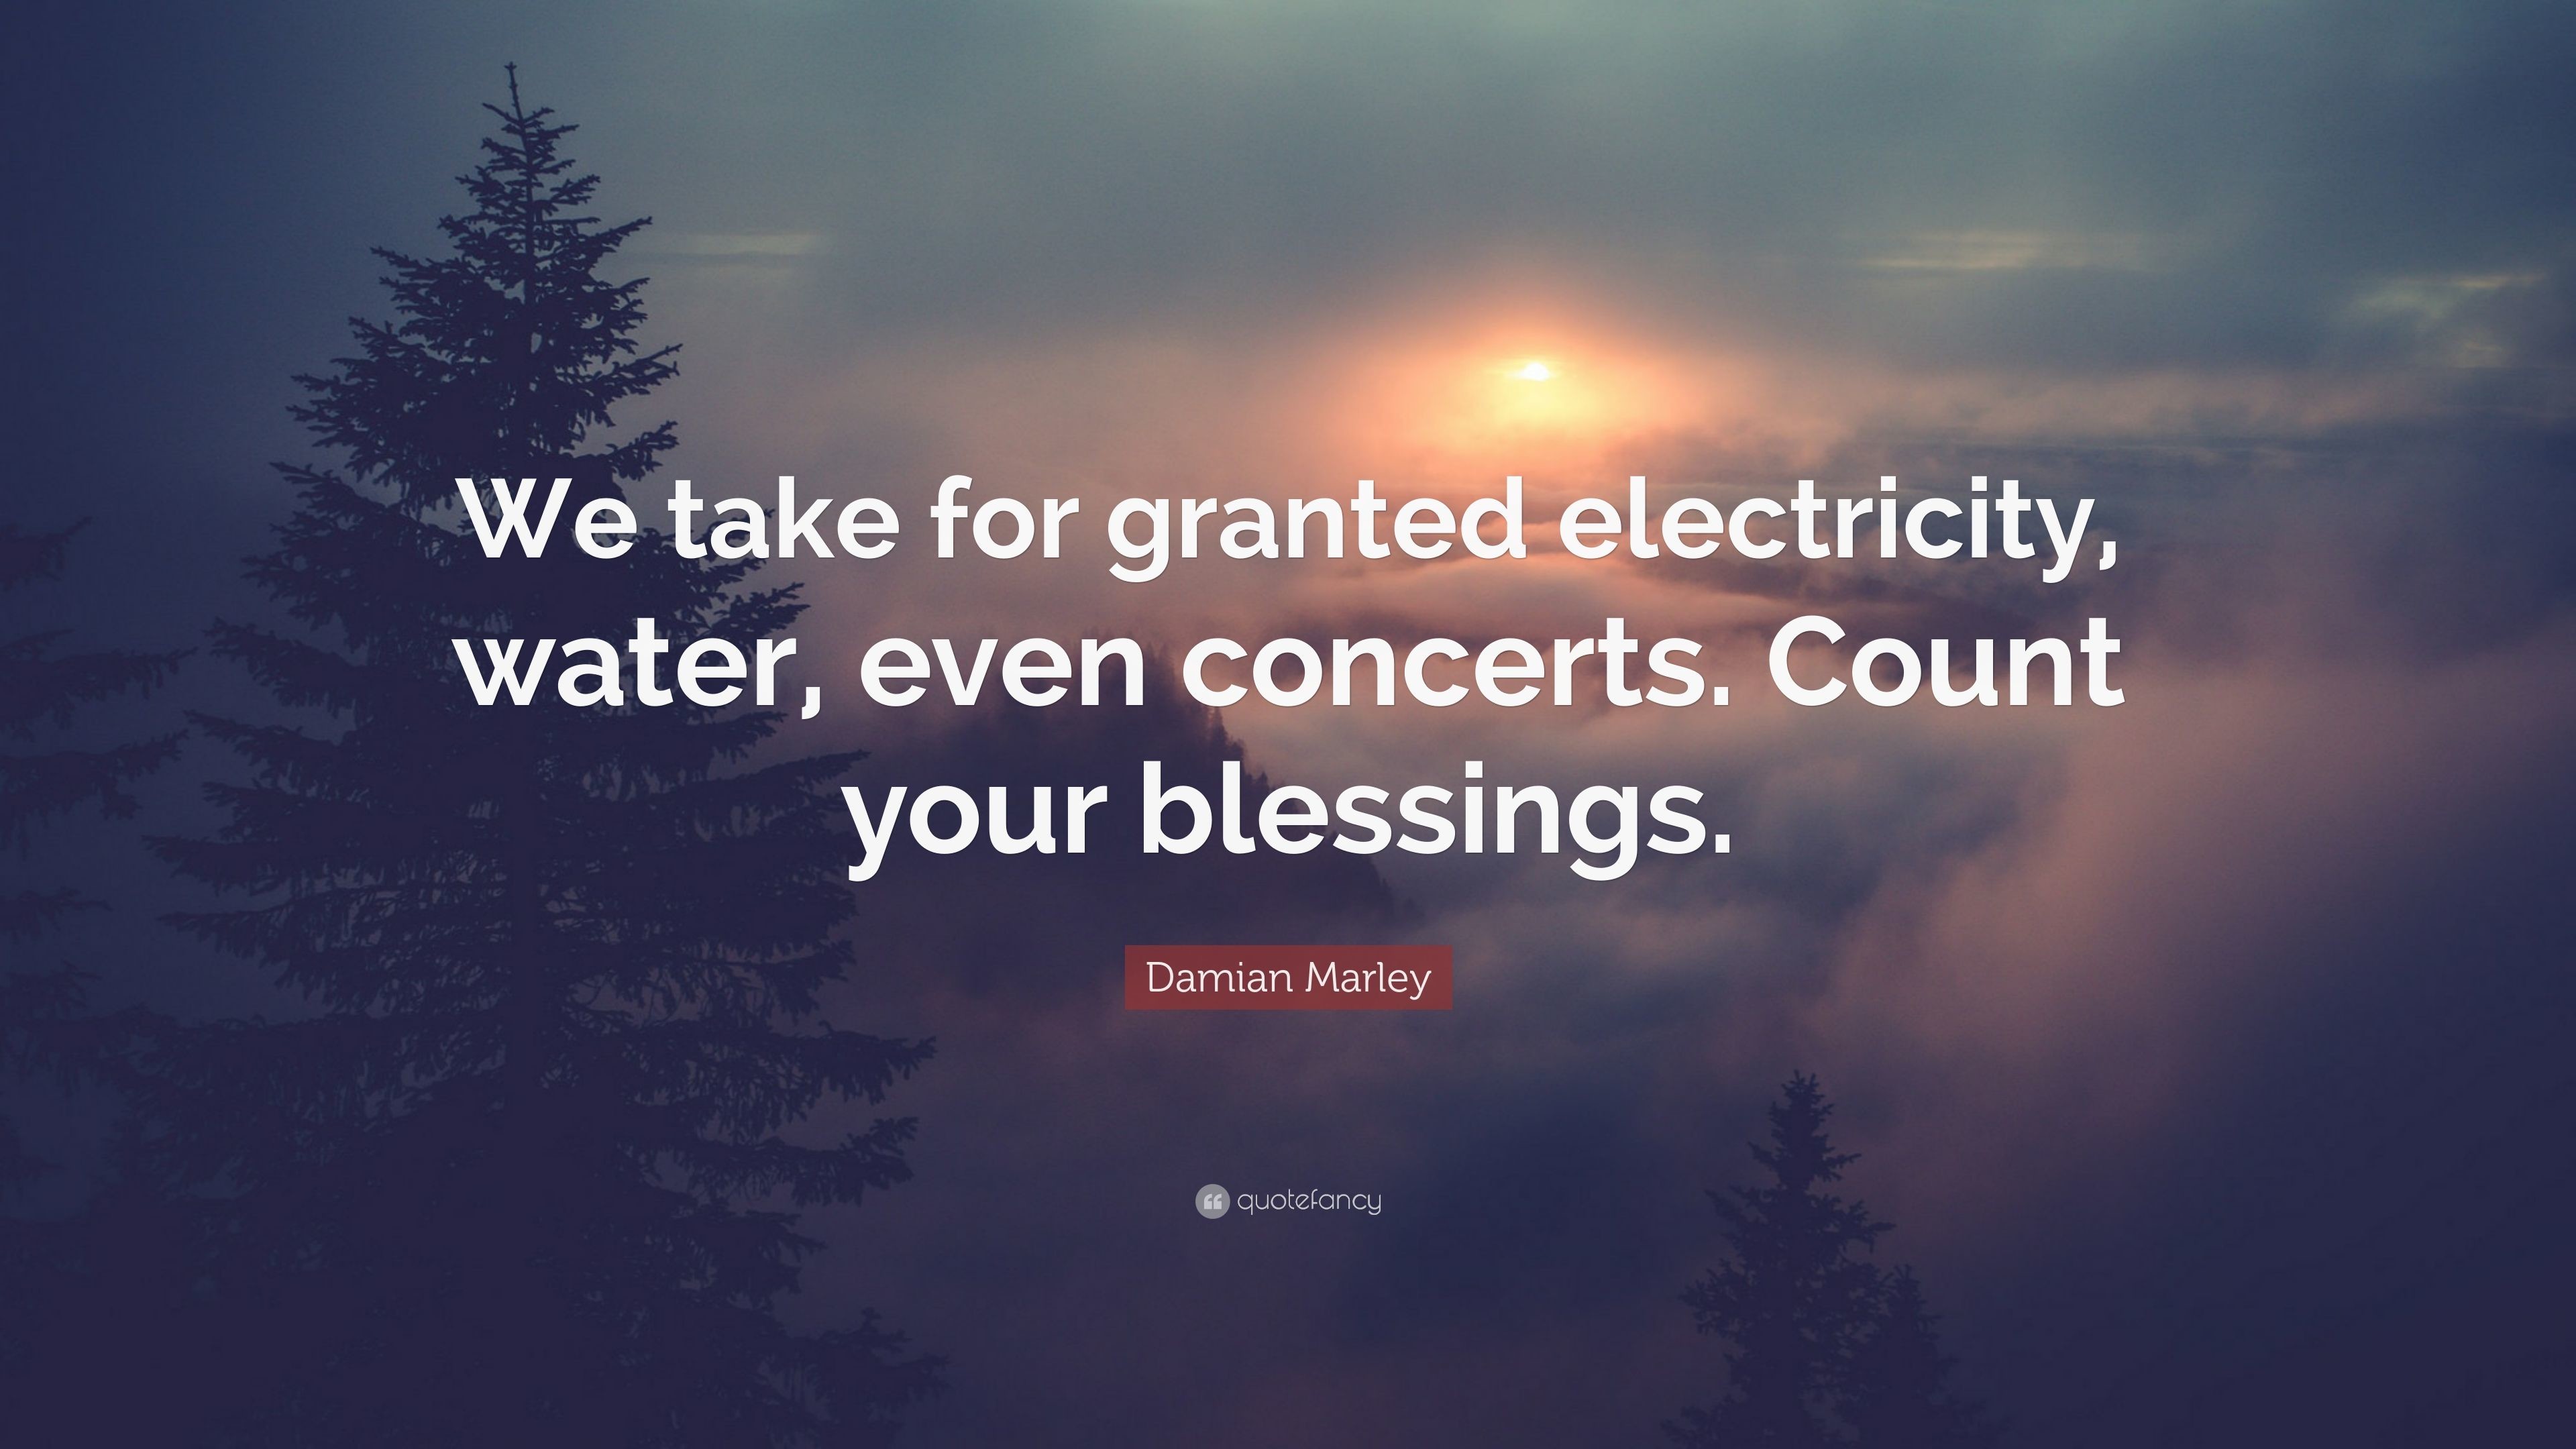 3840x2160 Damian Marley Quote: “We take for granted electricity, water, even concerts.